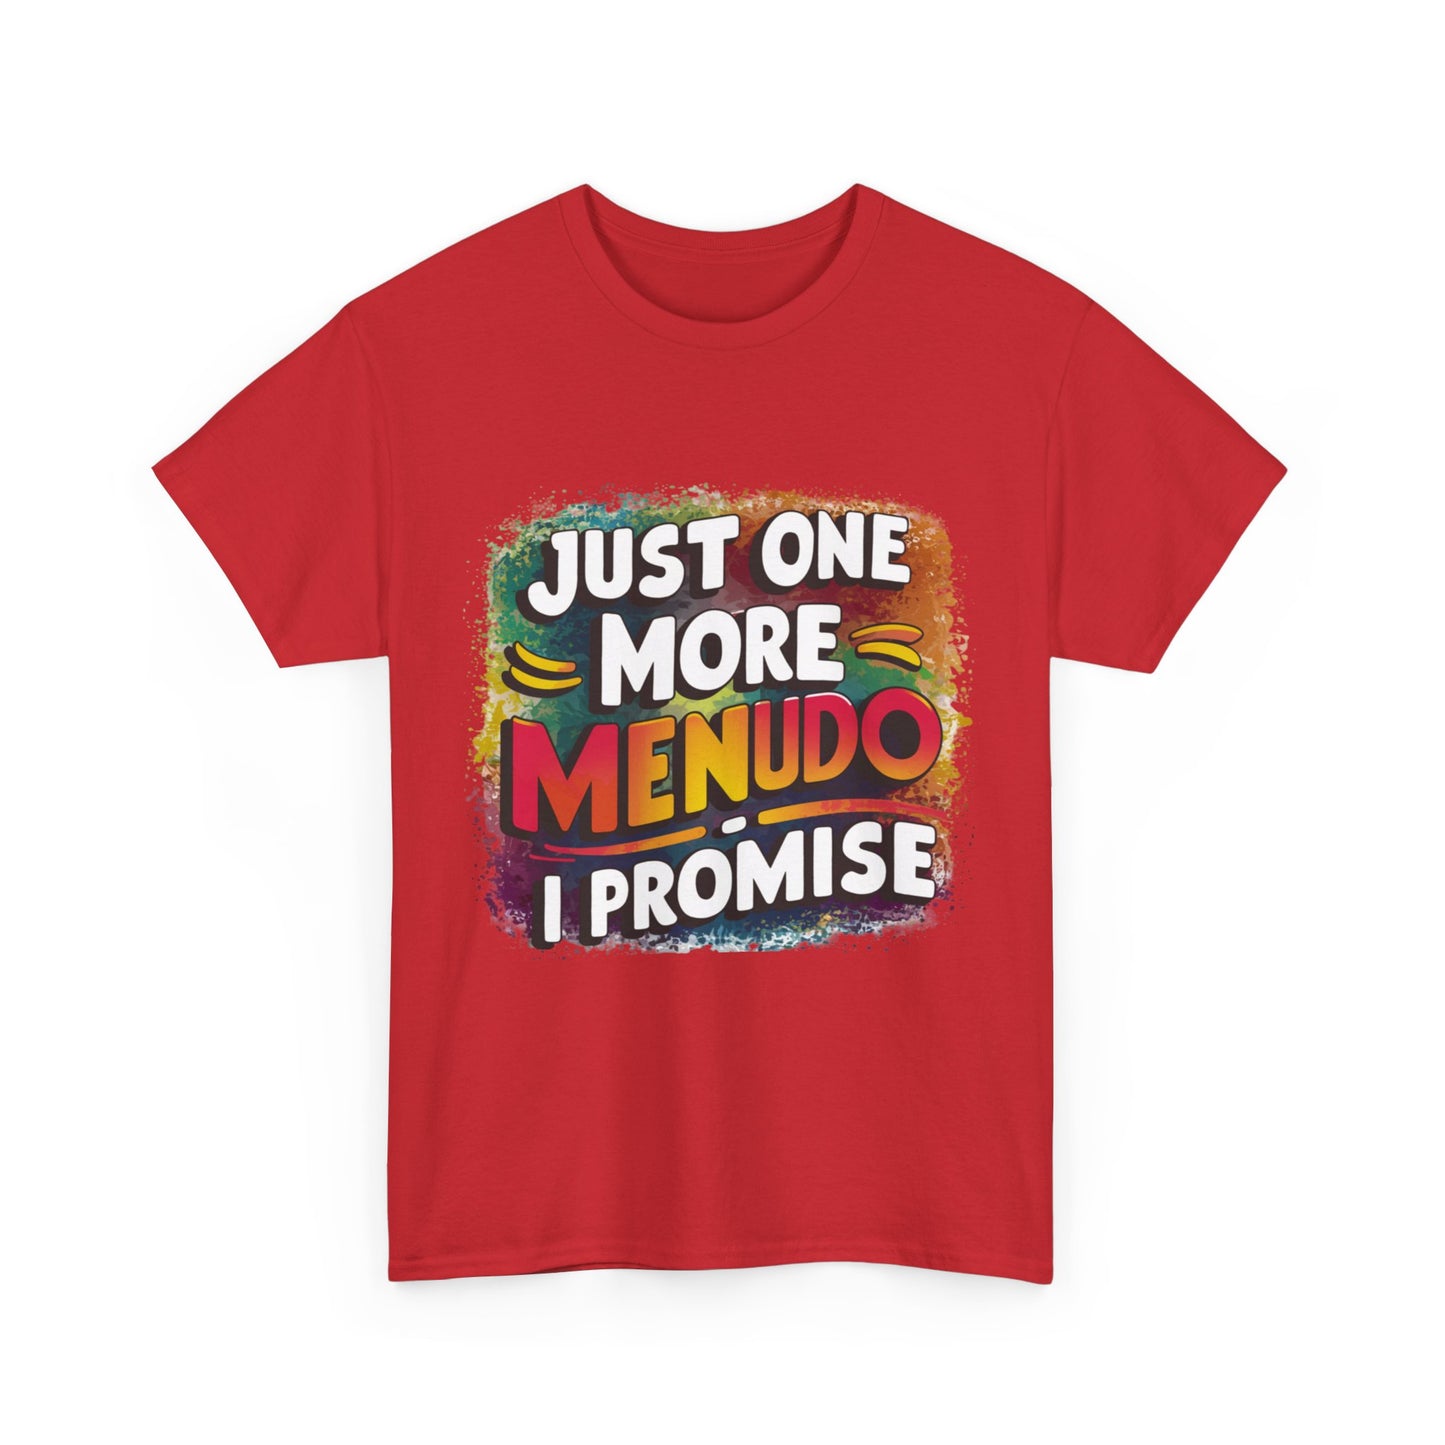 Just One More Menudo I Promise Mexican Food Graphic Unisex Heavy Cotton Tee Cotton Funny Humorous Graphic Soft Premium Unisex Men Women Red T-shirt Birthday Gift-33